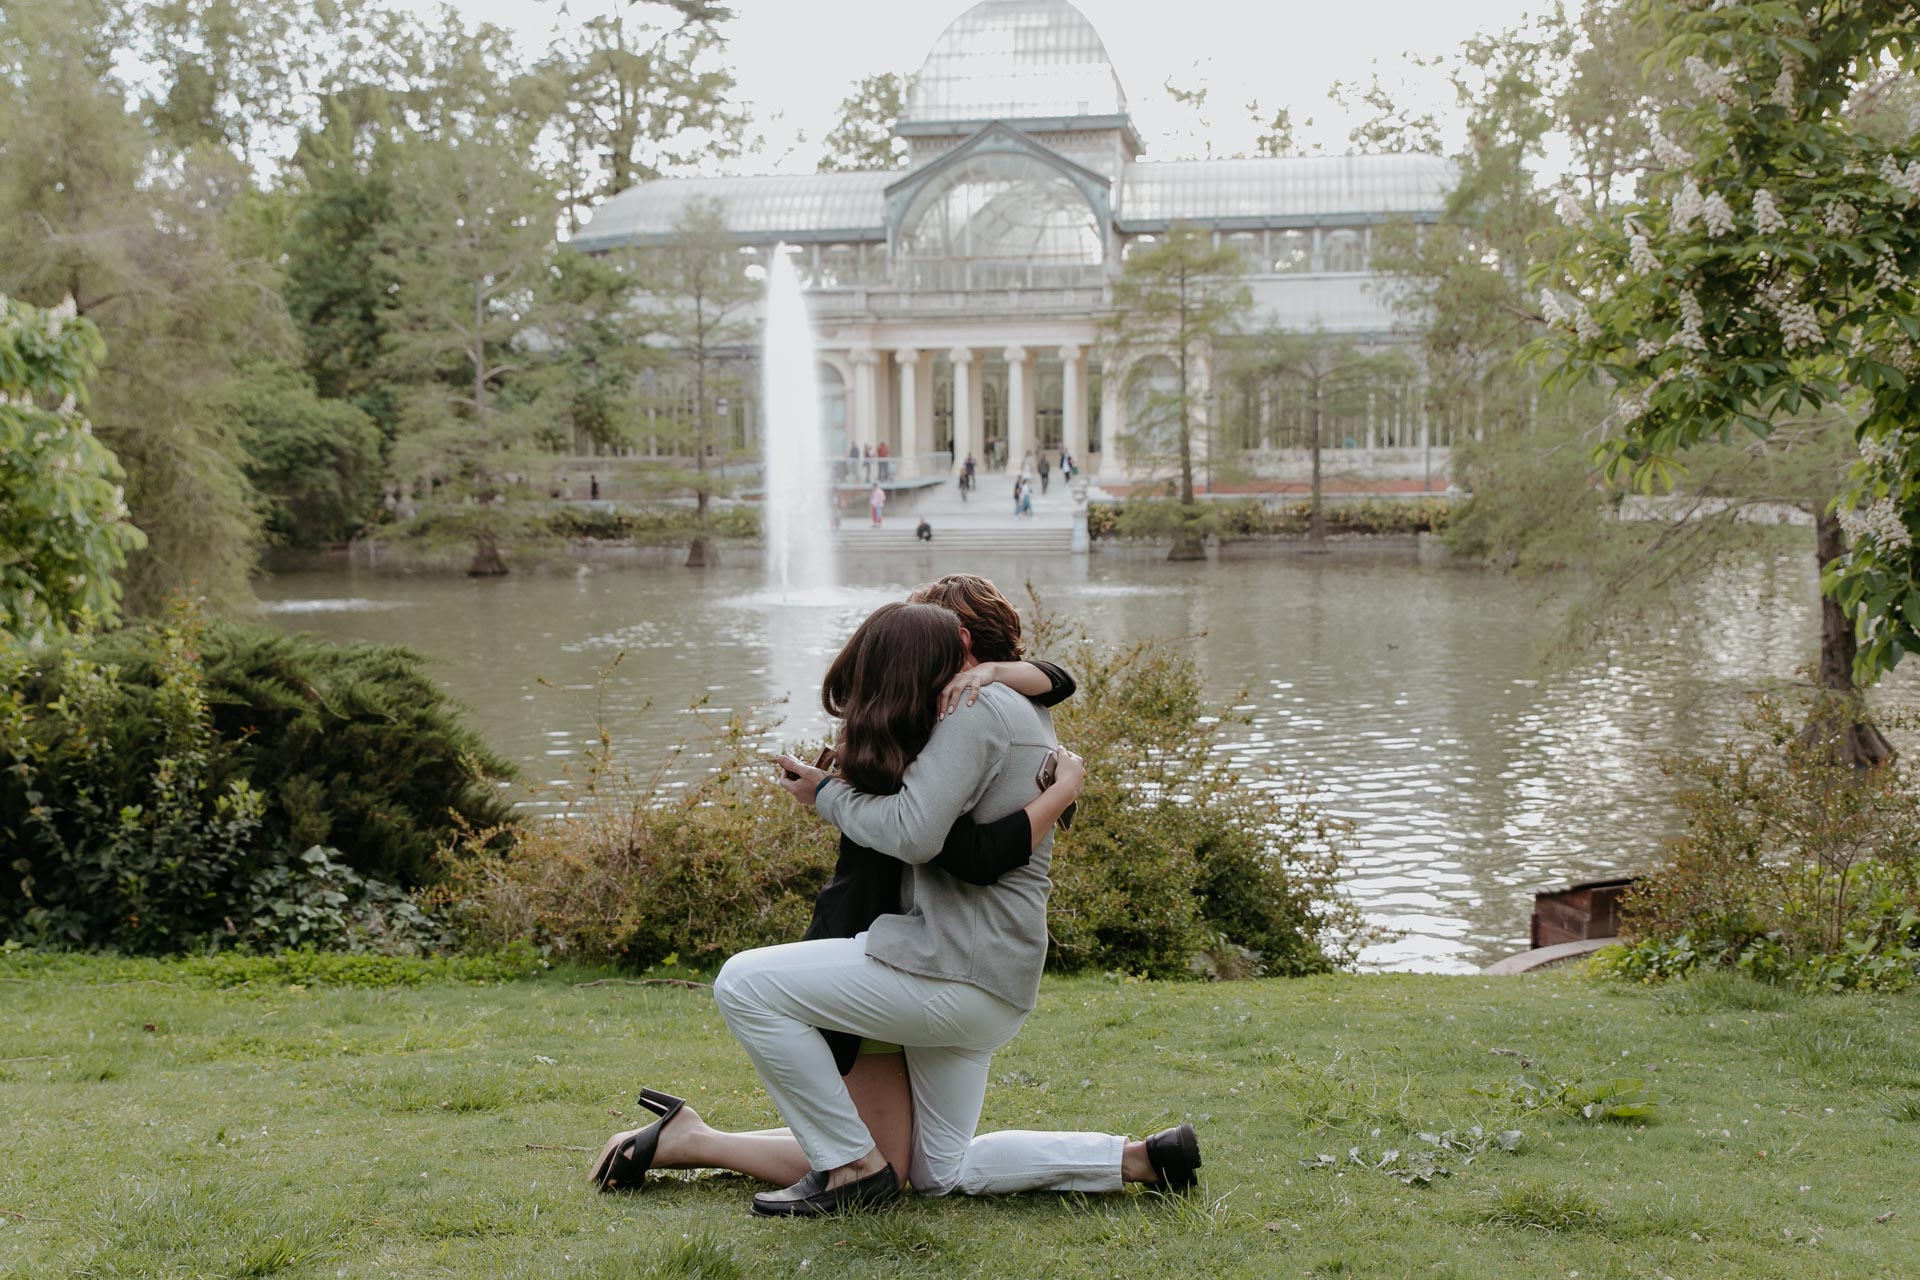 lovely marriage proposal at the retiro park in madrid